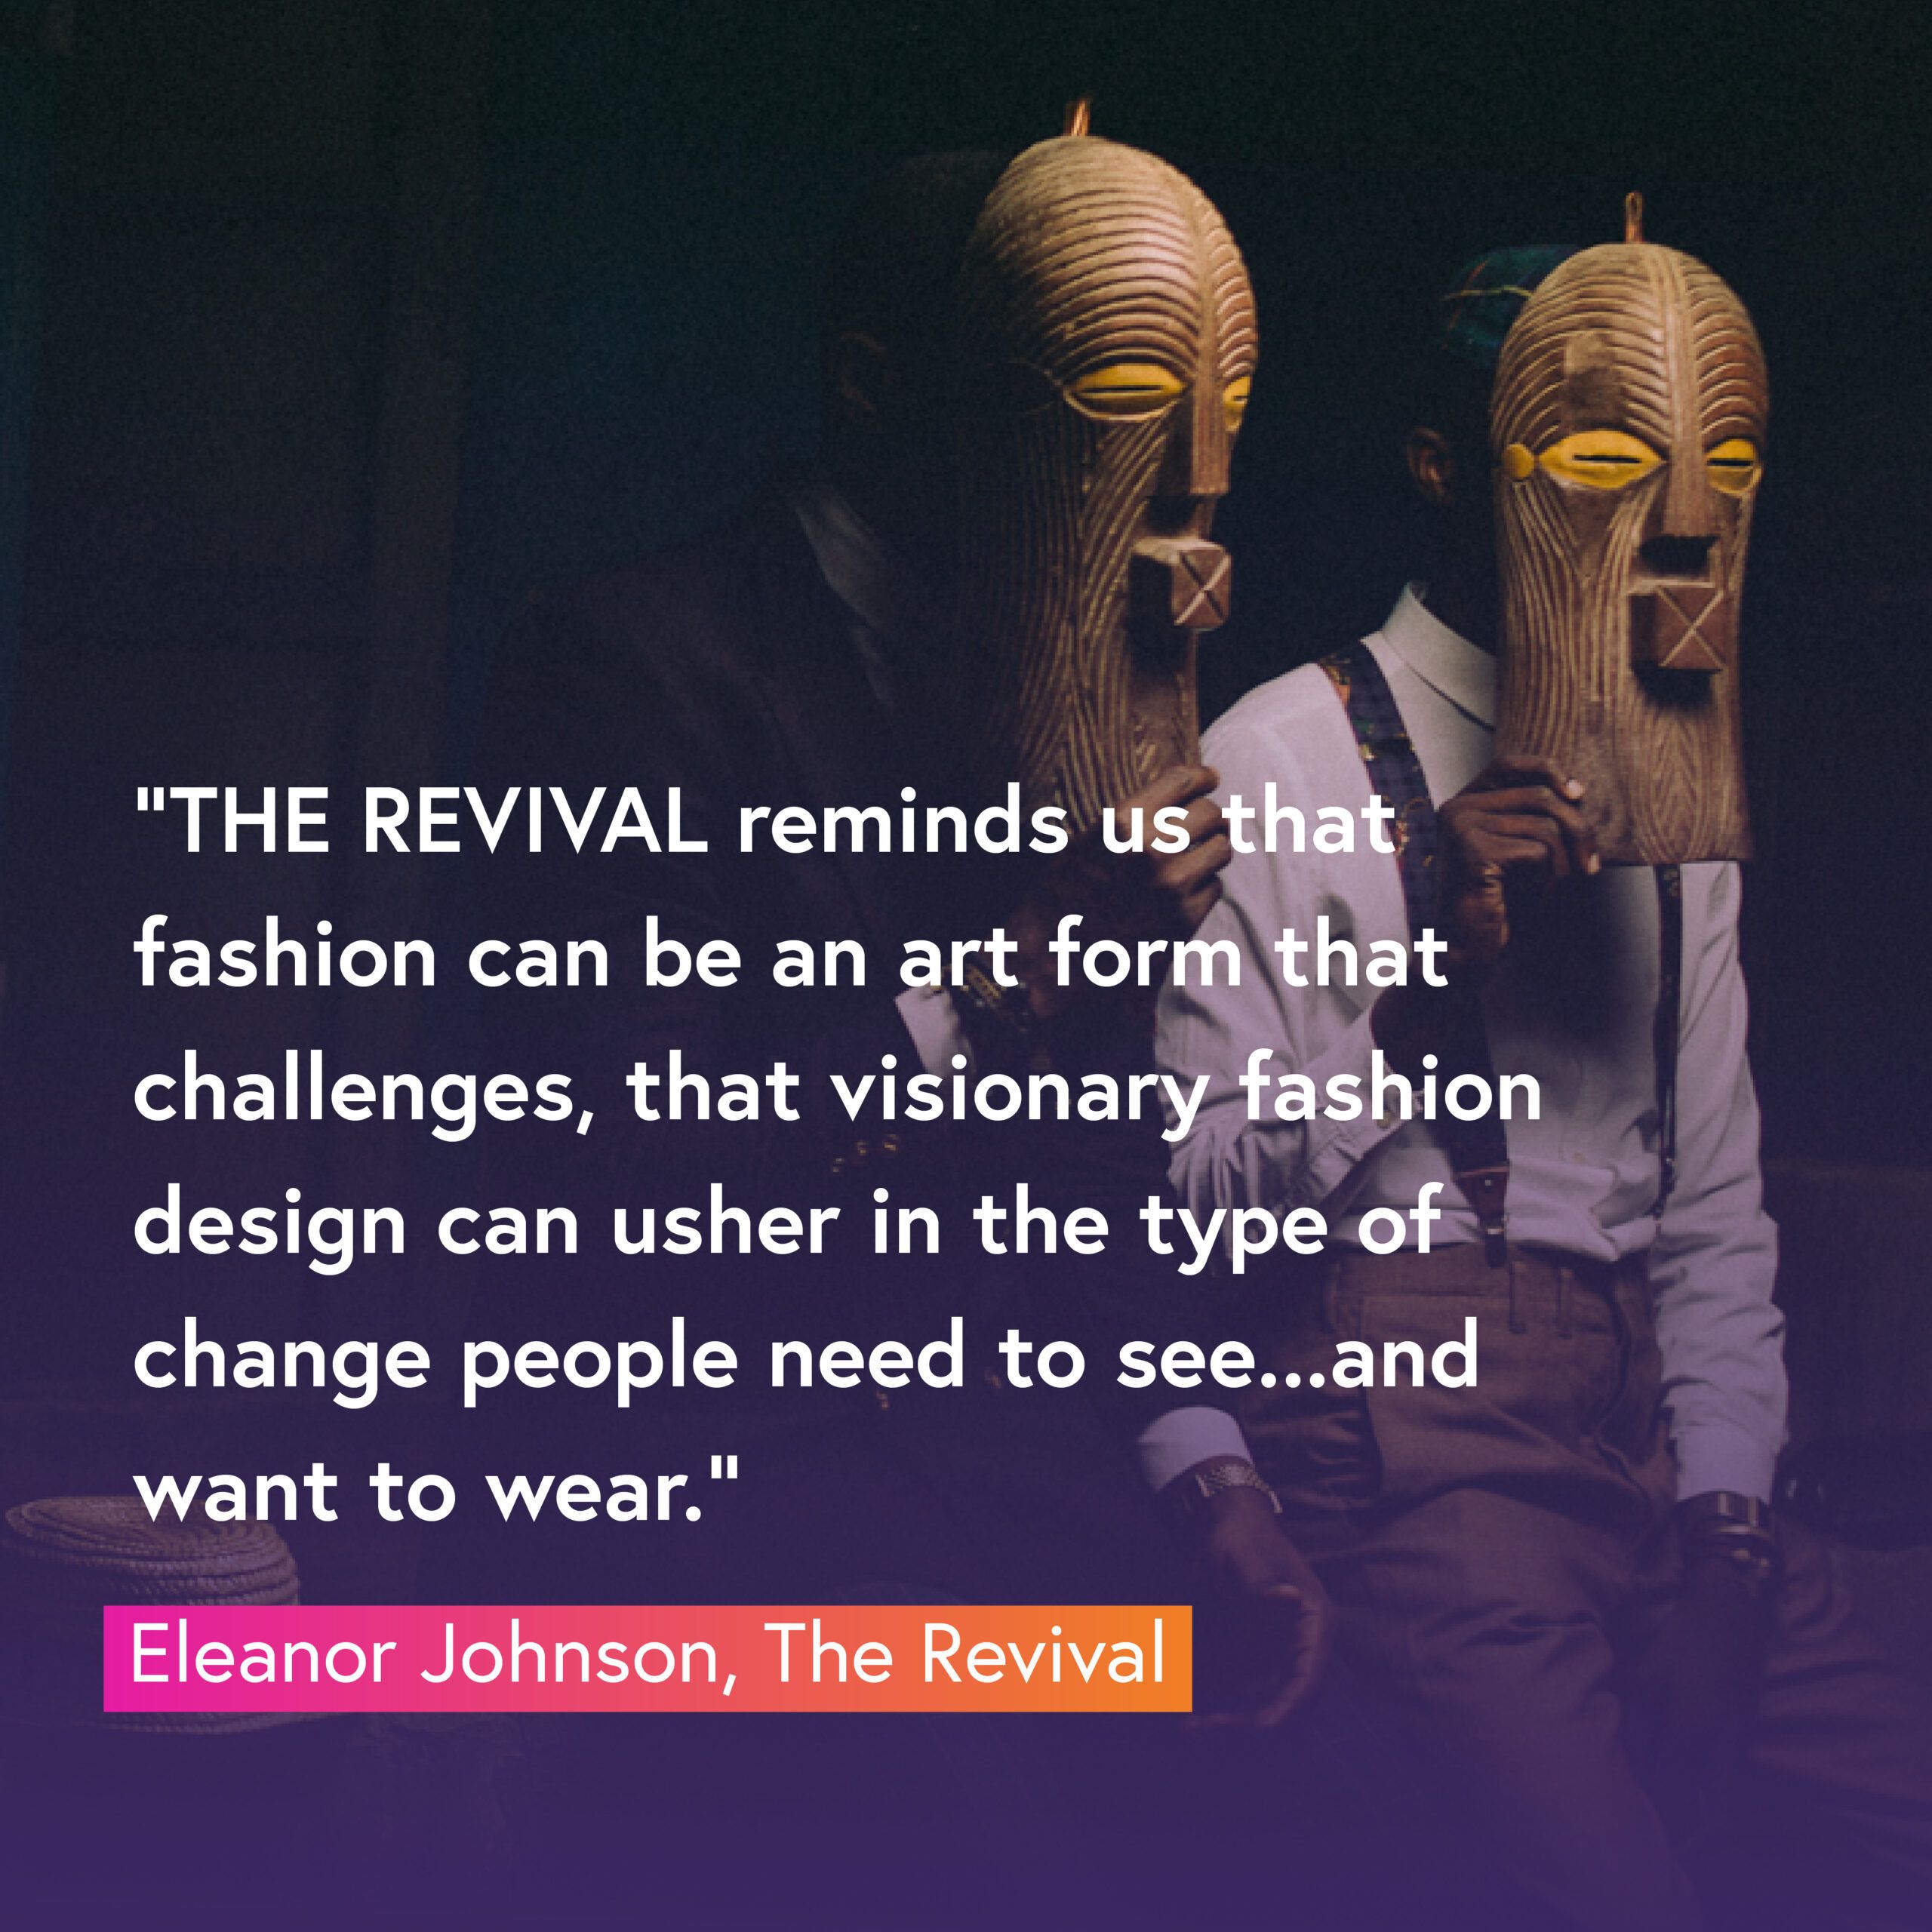 Eleanor Johnson from THE REVIVAL, told us, “THE REVIVAL reminds us that fashion can be an art form that challenges; that visionary fashion design can usher in the type of change people need to see…and want to wear.”